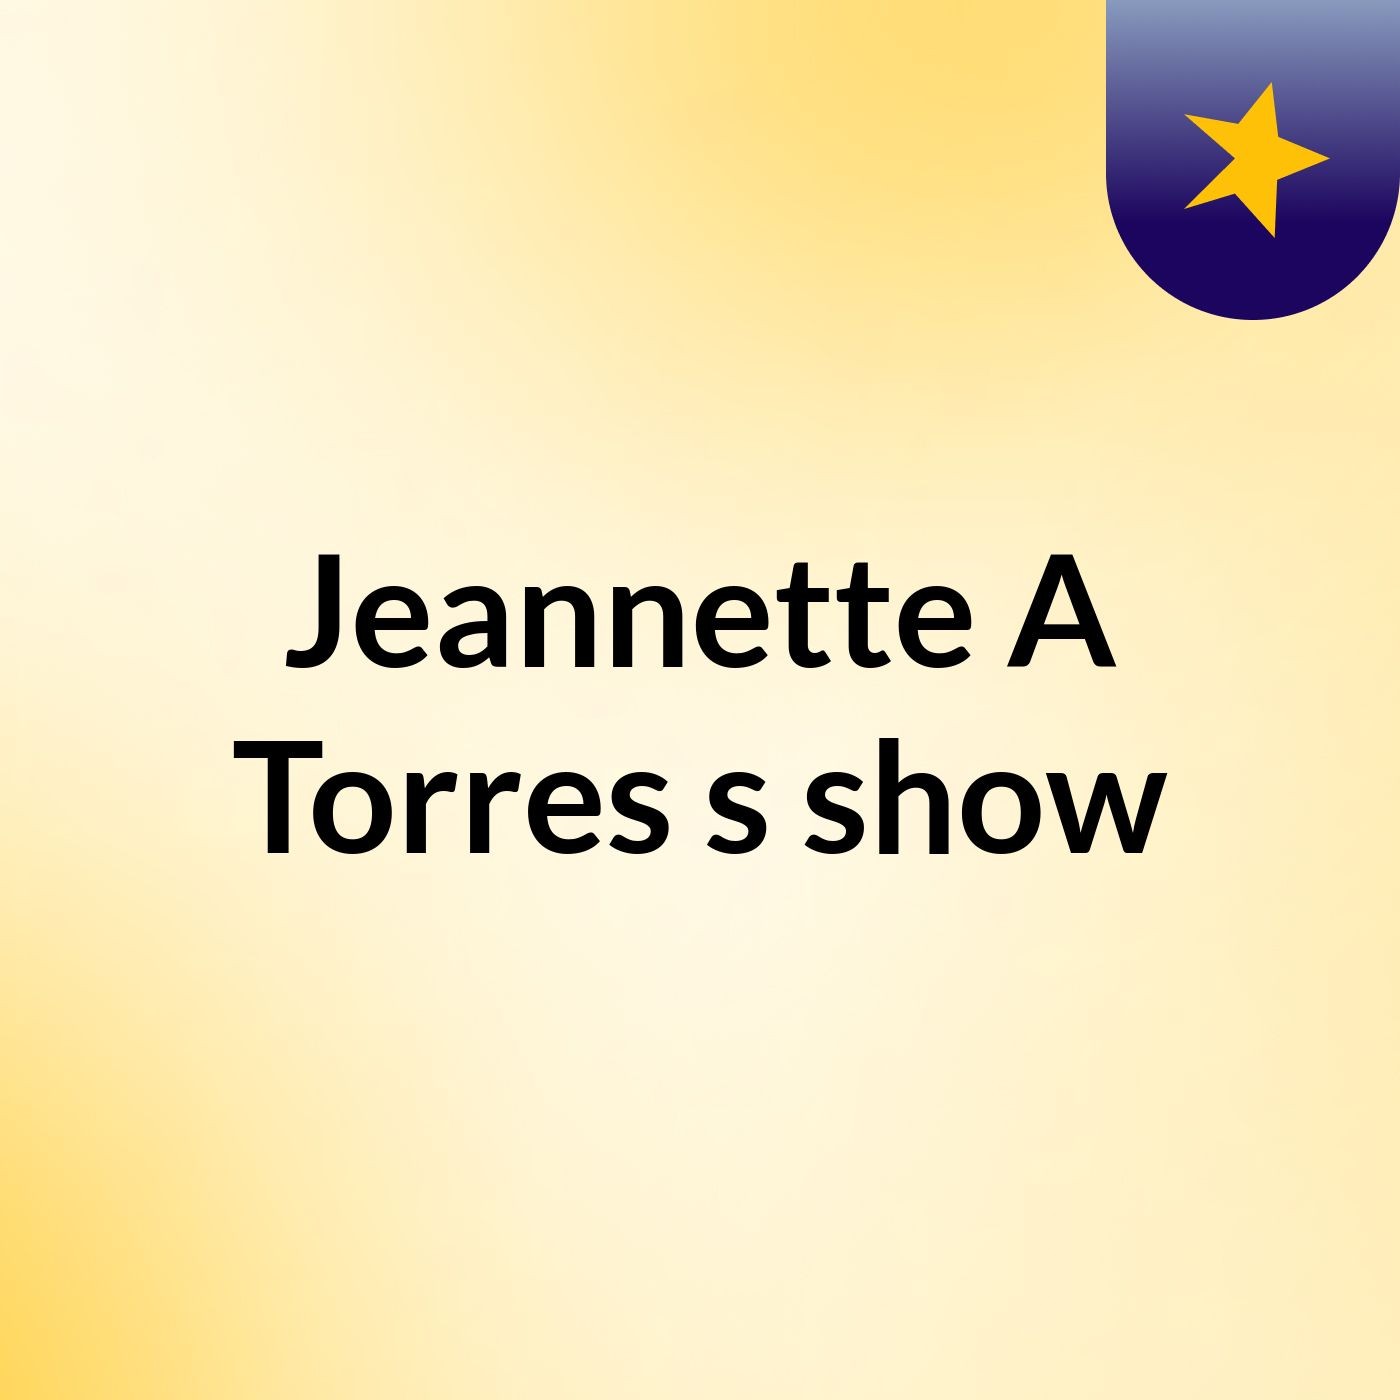 Jeannette A Torres's show